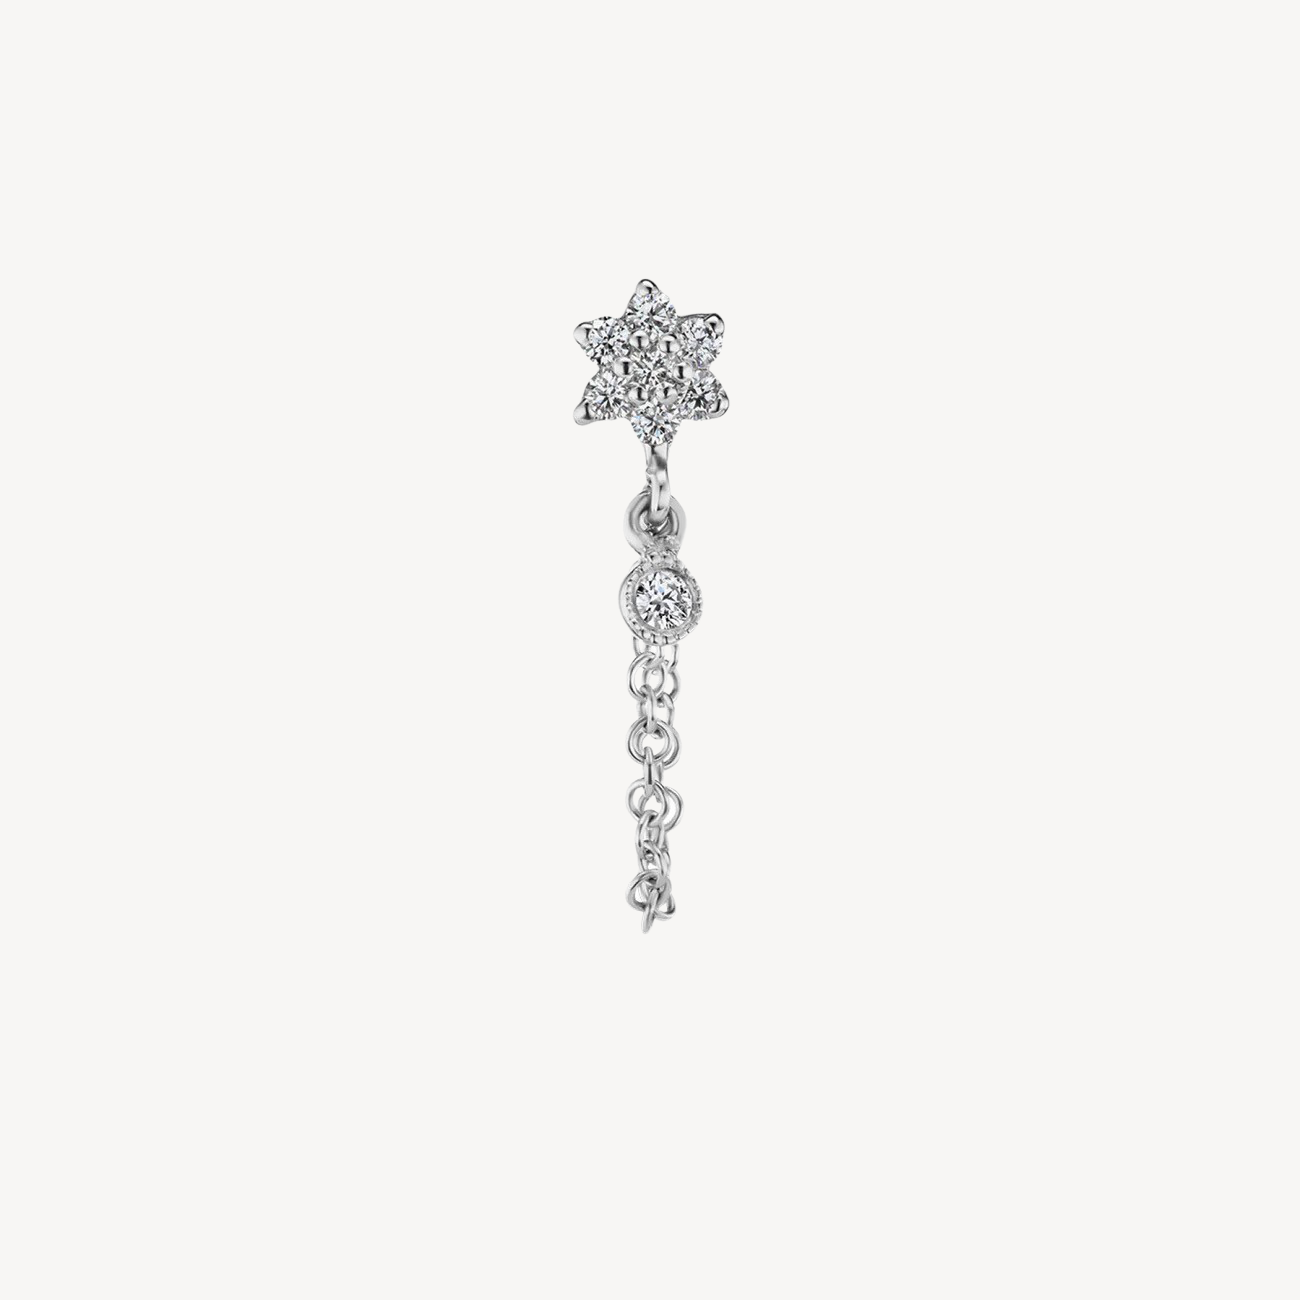 Star Enchained 8mm Earring